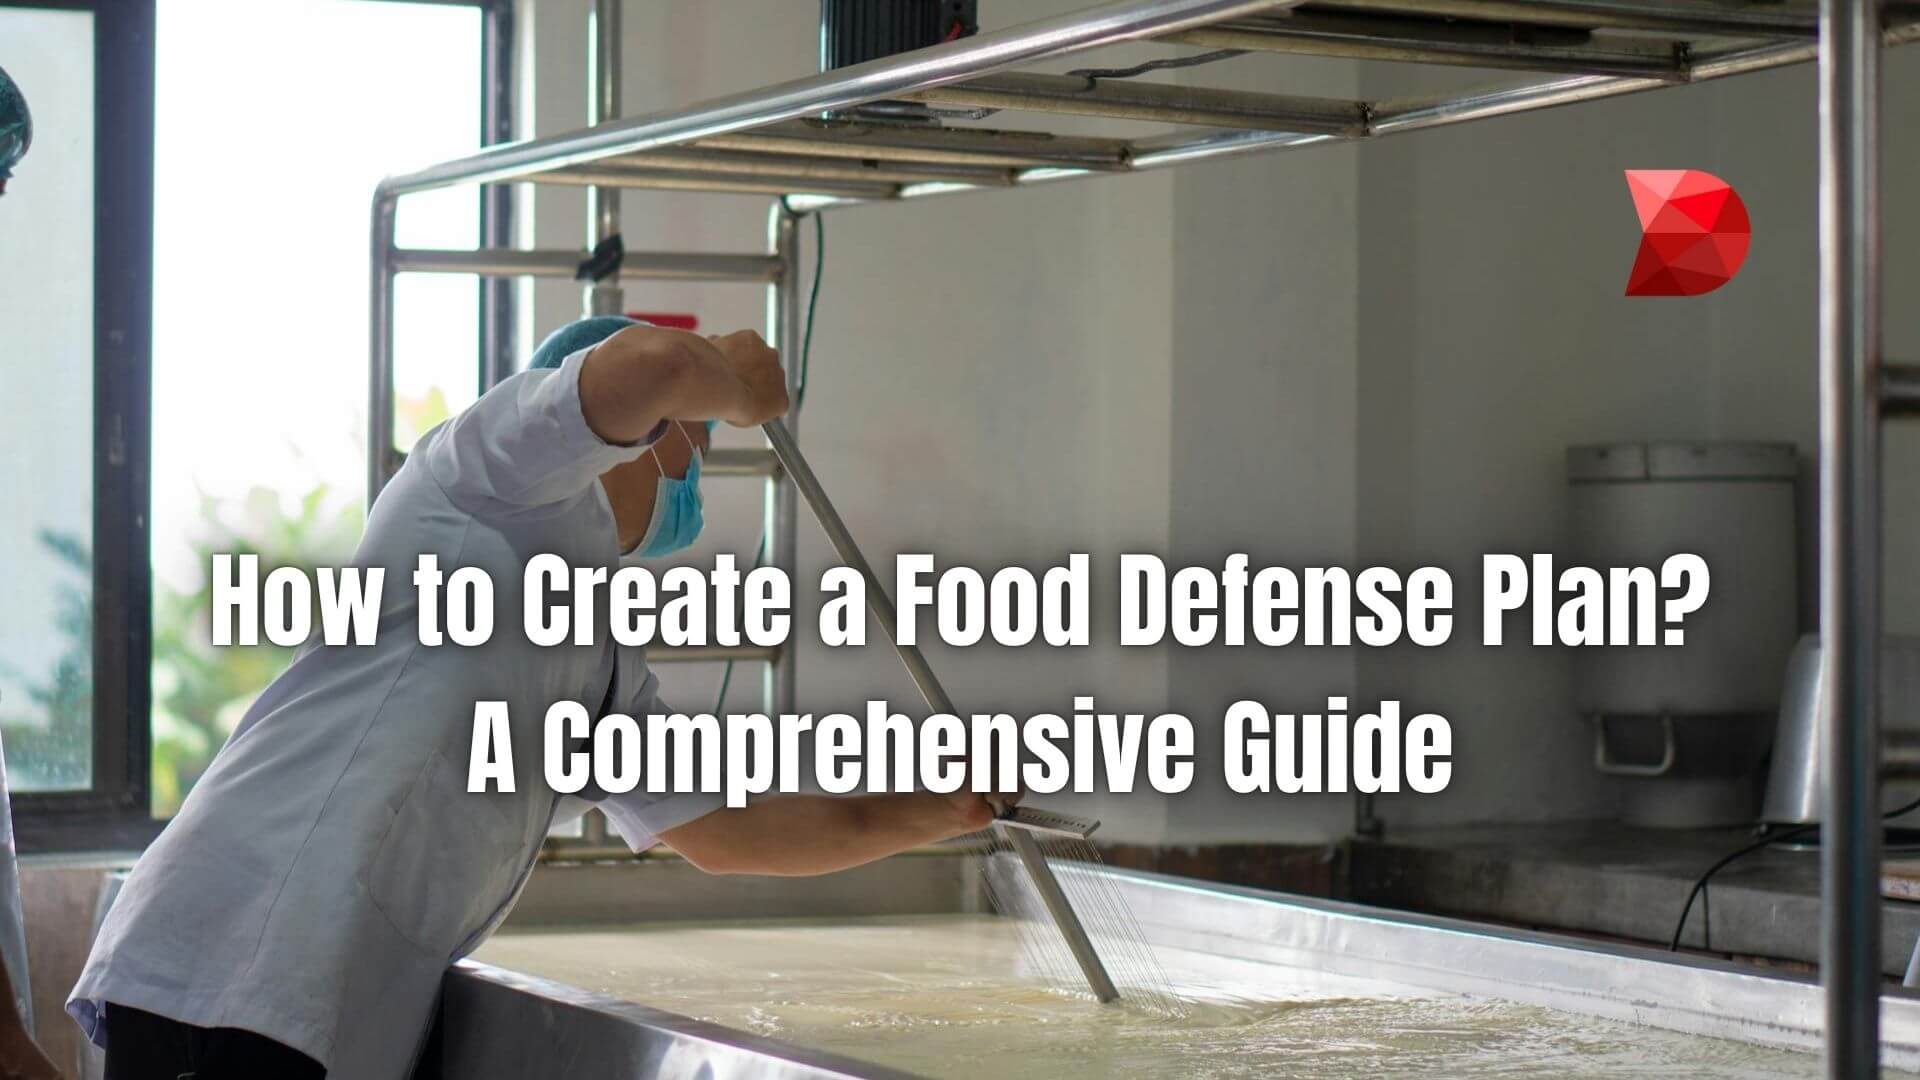 Stay ahead of food safety regulations with our expertly crafted guide. Learn how to create a robust food defense plan for your business.